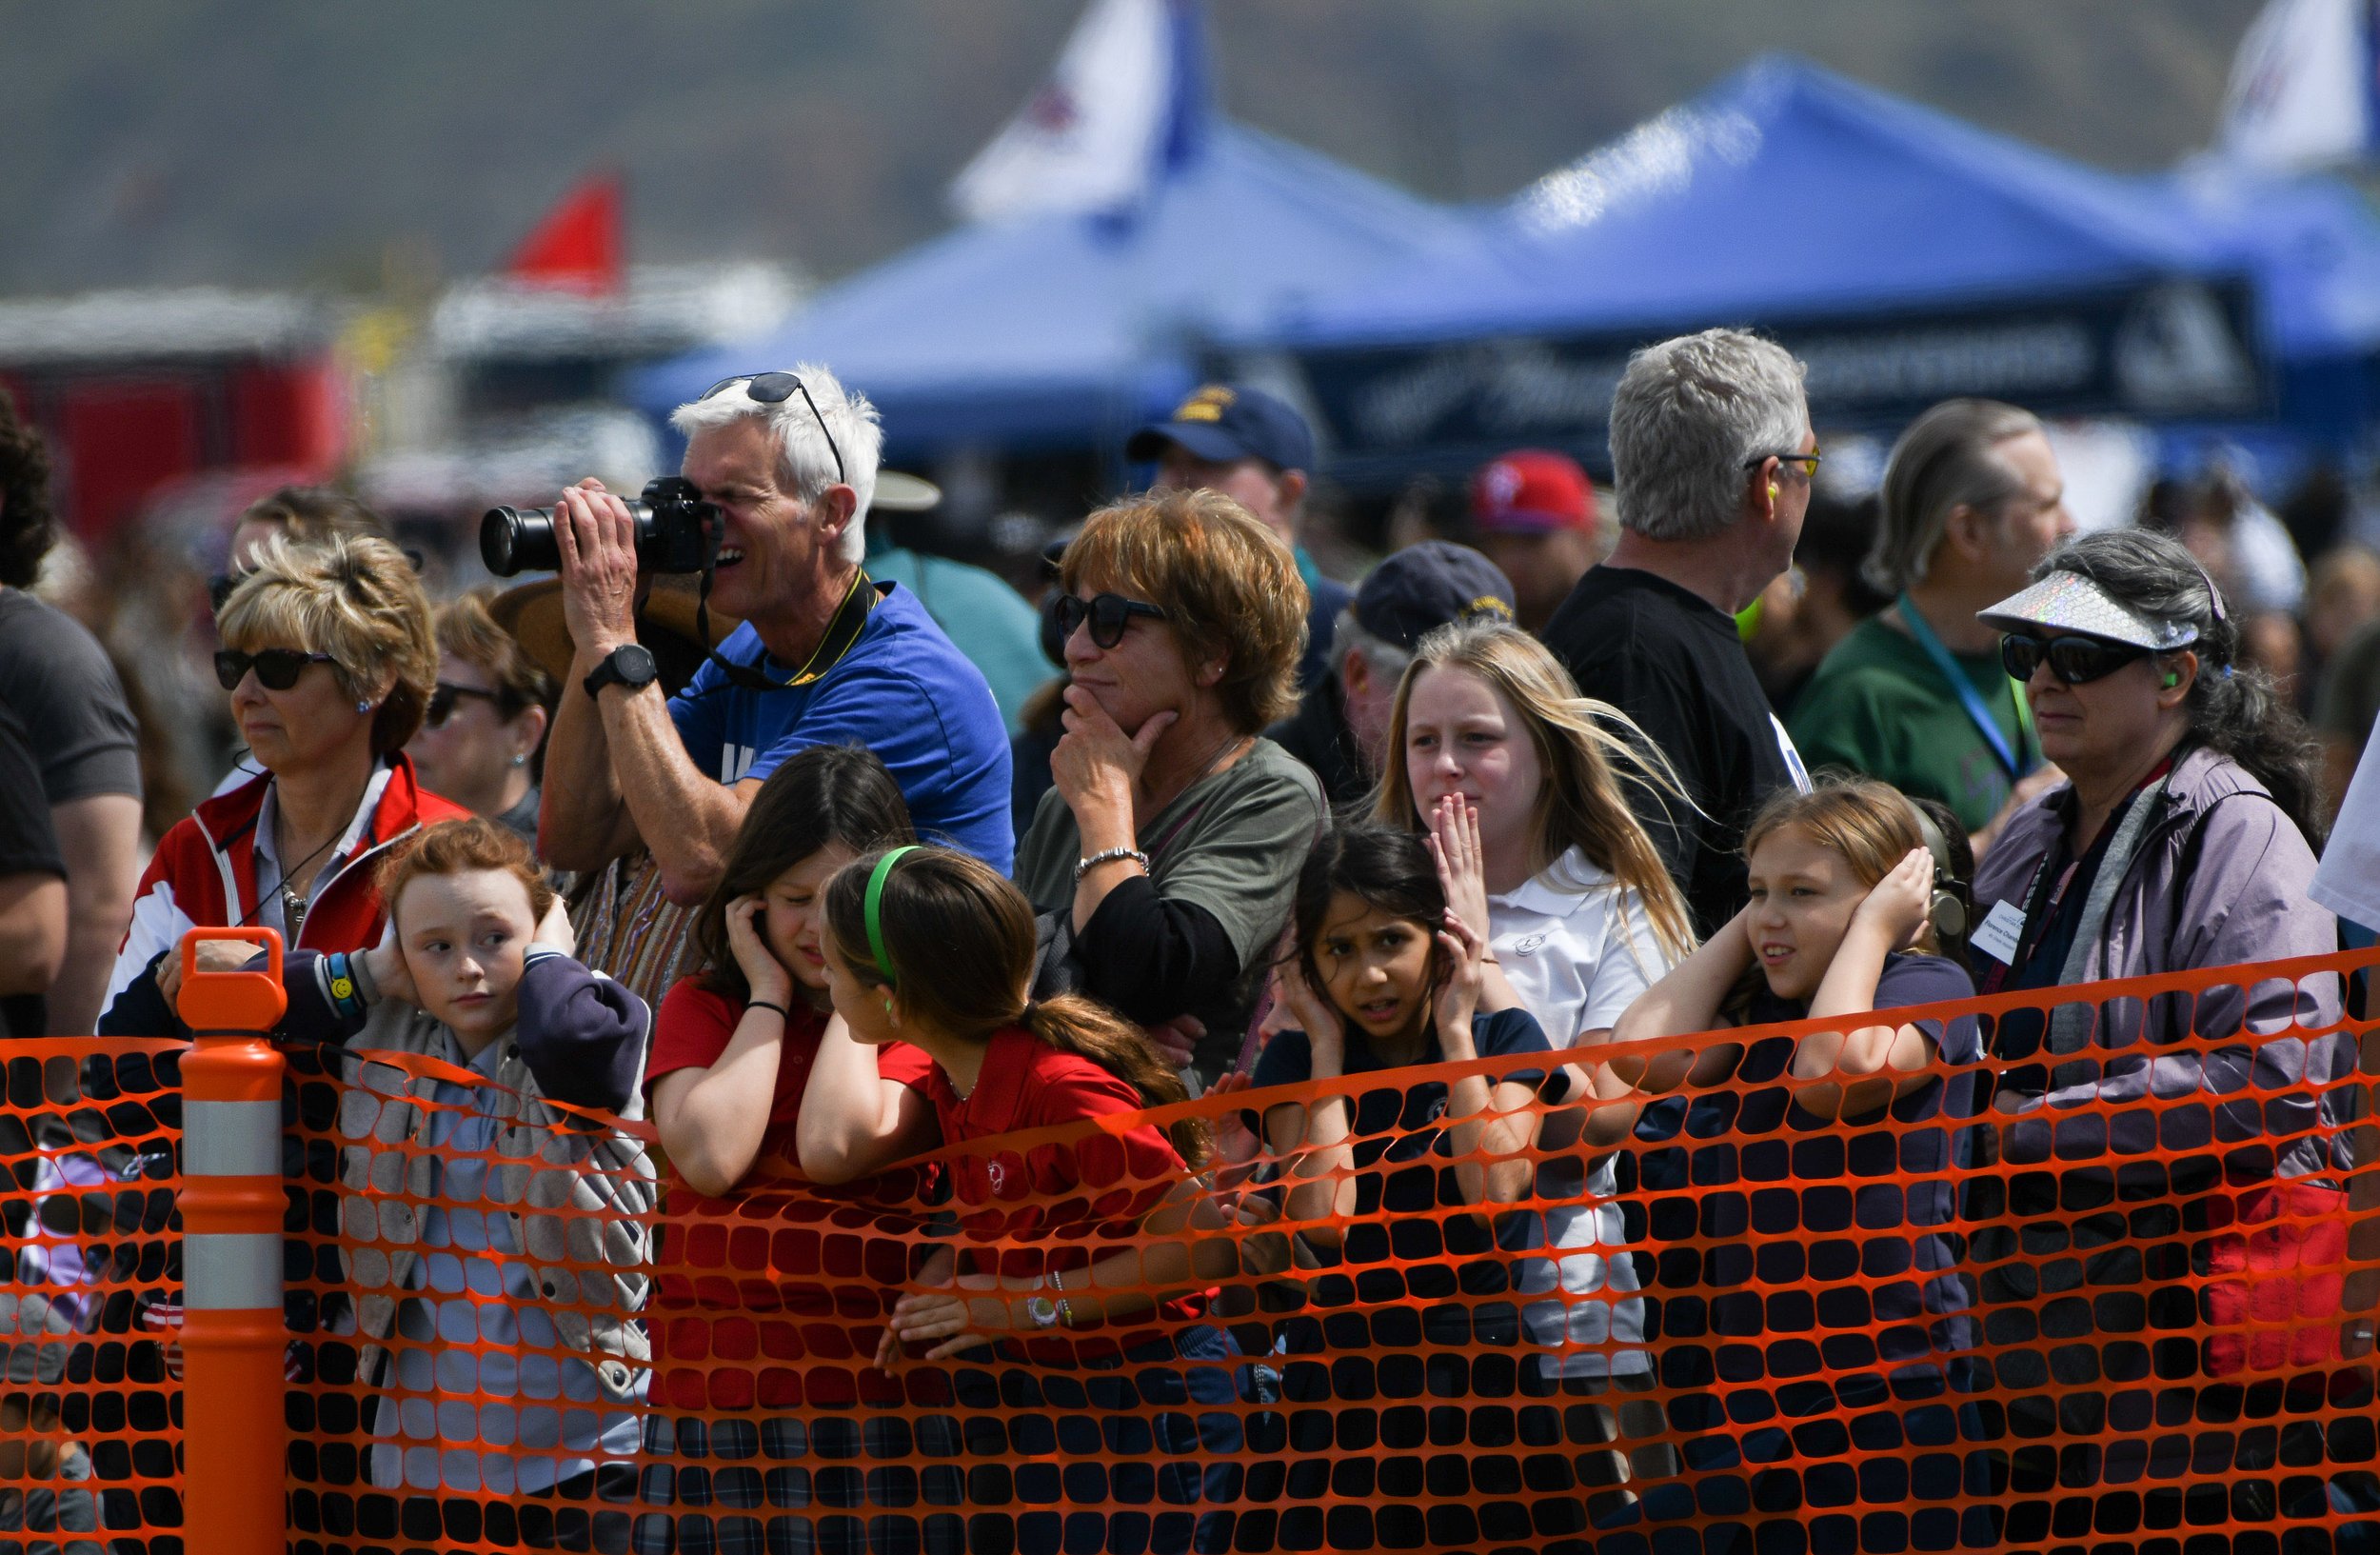  Crowds of about 205.000 gathered over the weekend at the Point Mugu Air Show March 17-19, 2023.  It was 2015 when NBVC at their last air show.  The event returned featuring the U.S. AIr Force Thunderbirds and the U.S. Blue Angels together for the fi